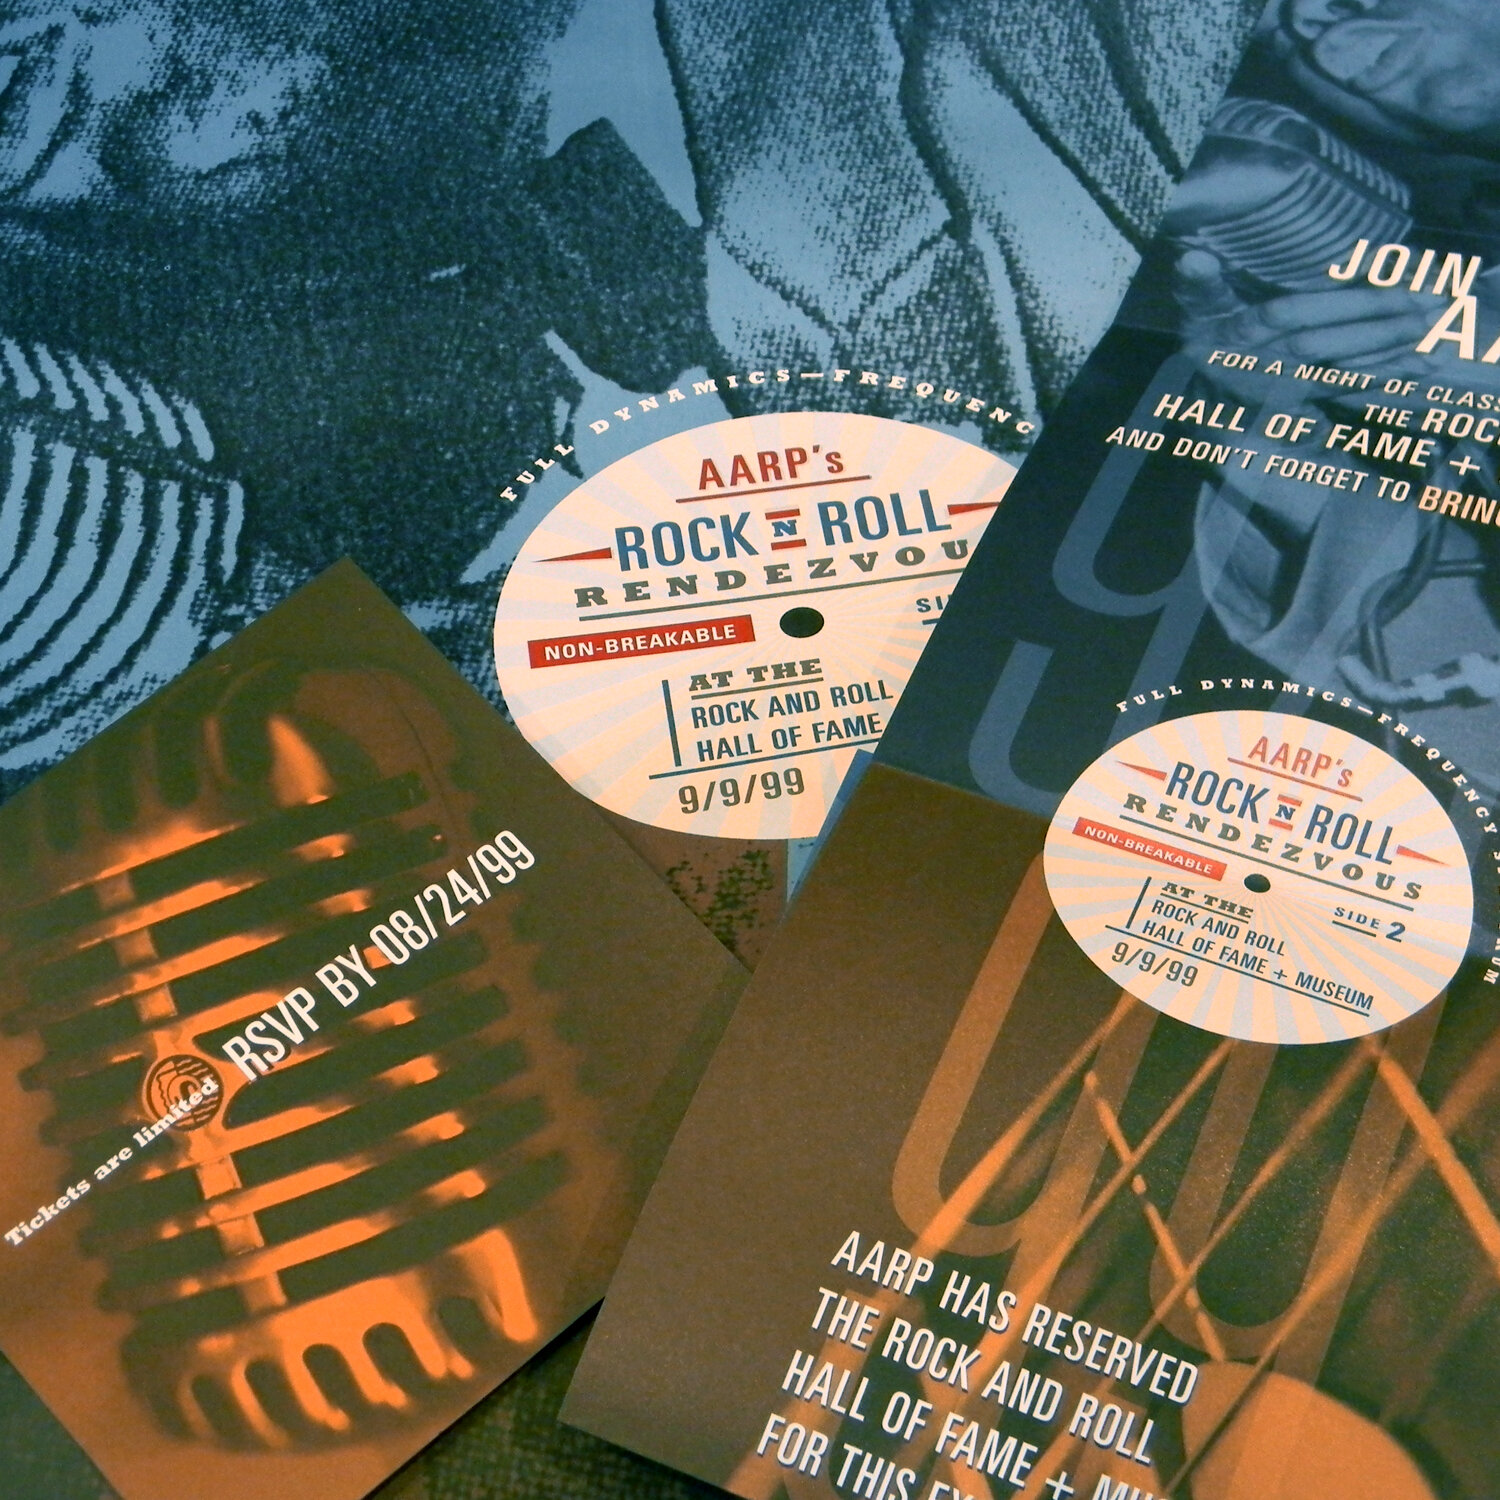  AARP &amp; ROCK-N-ROLL HALL OF FAME AND MUSEUM - AARP &amp; Rock-n-Roll Hall of Fame direct mail invitation materials, detail 